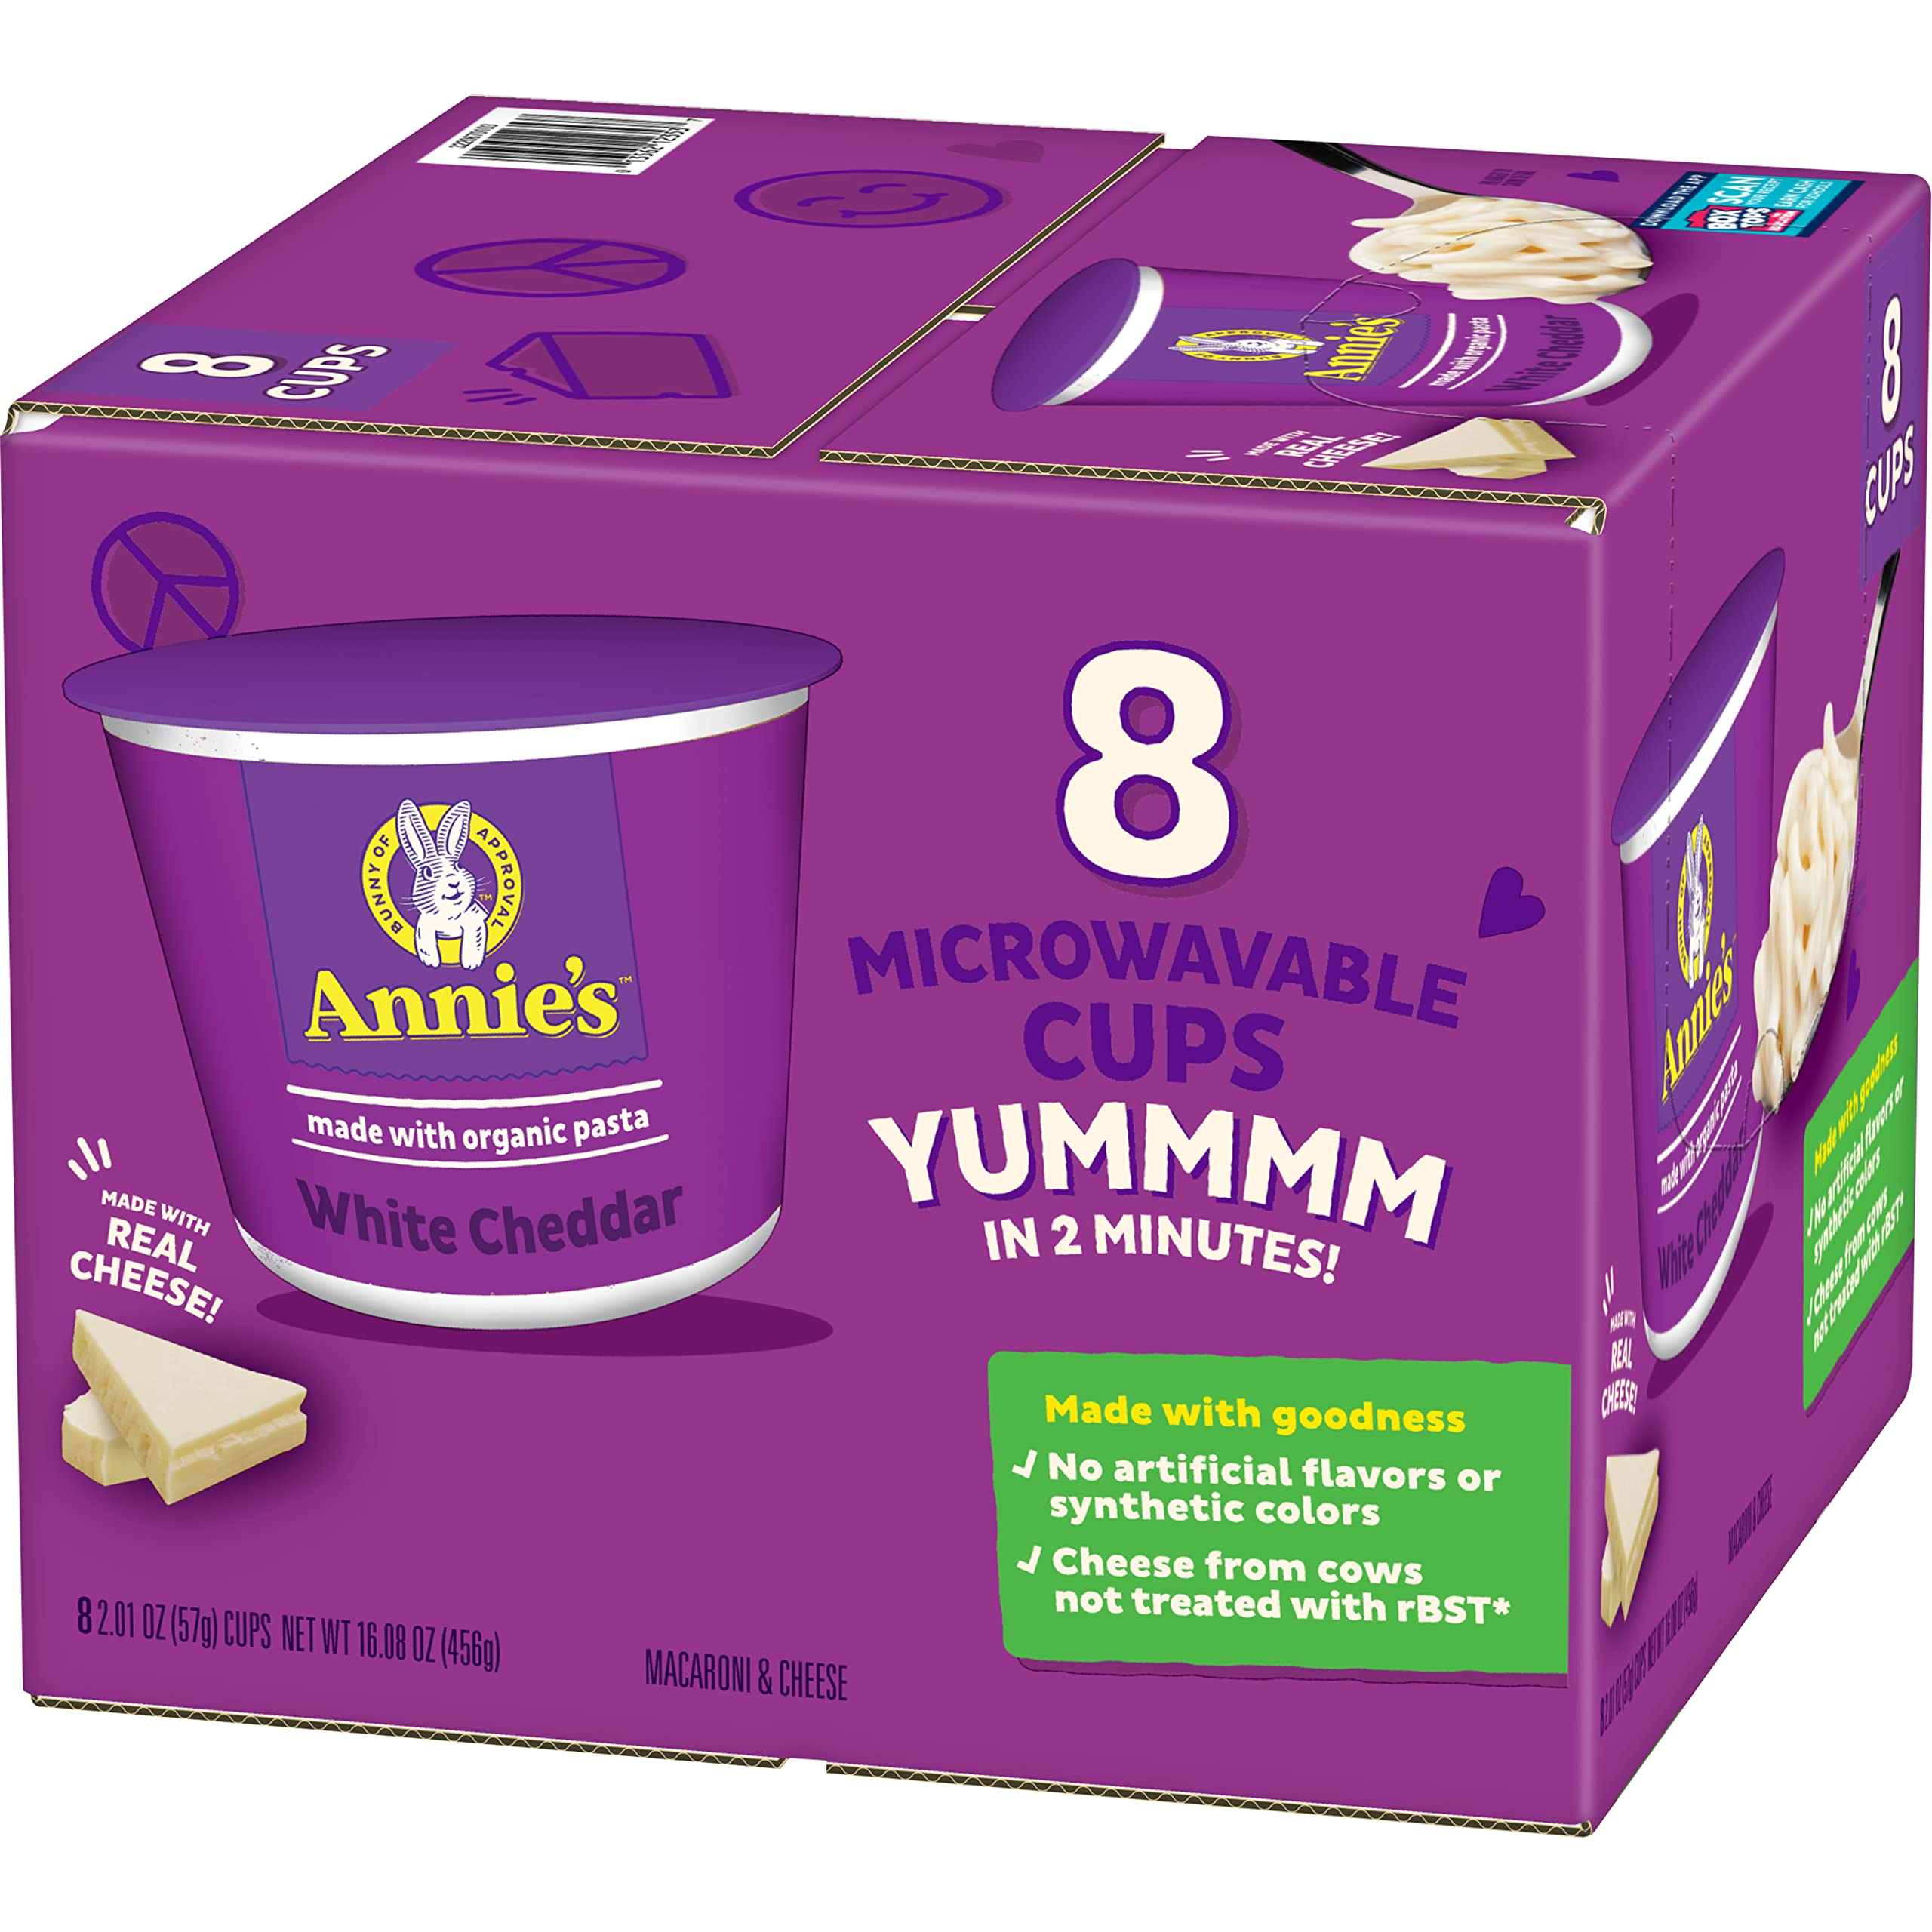 8-Count 2.01-Oz Annie's White Cheddar Mac & Cheese Cups $7.49 w/ S&S + Free Shipping w/ Prime or on orders over $35